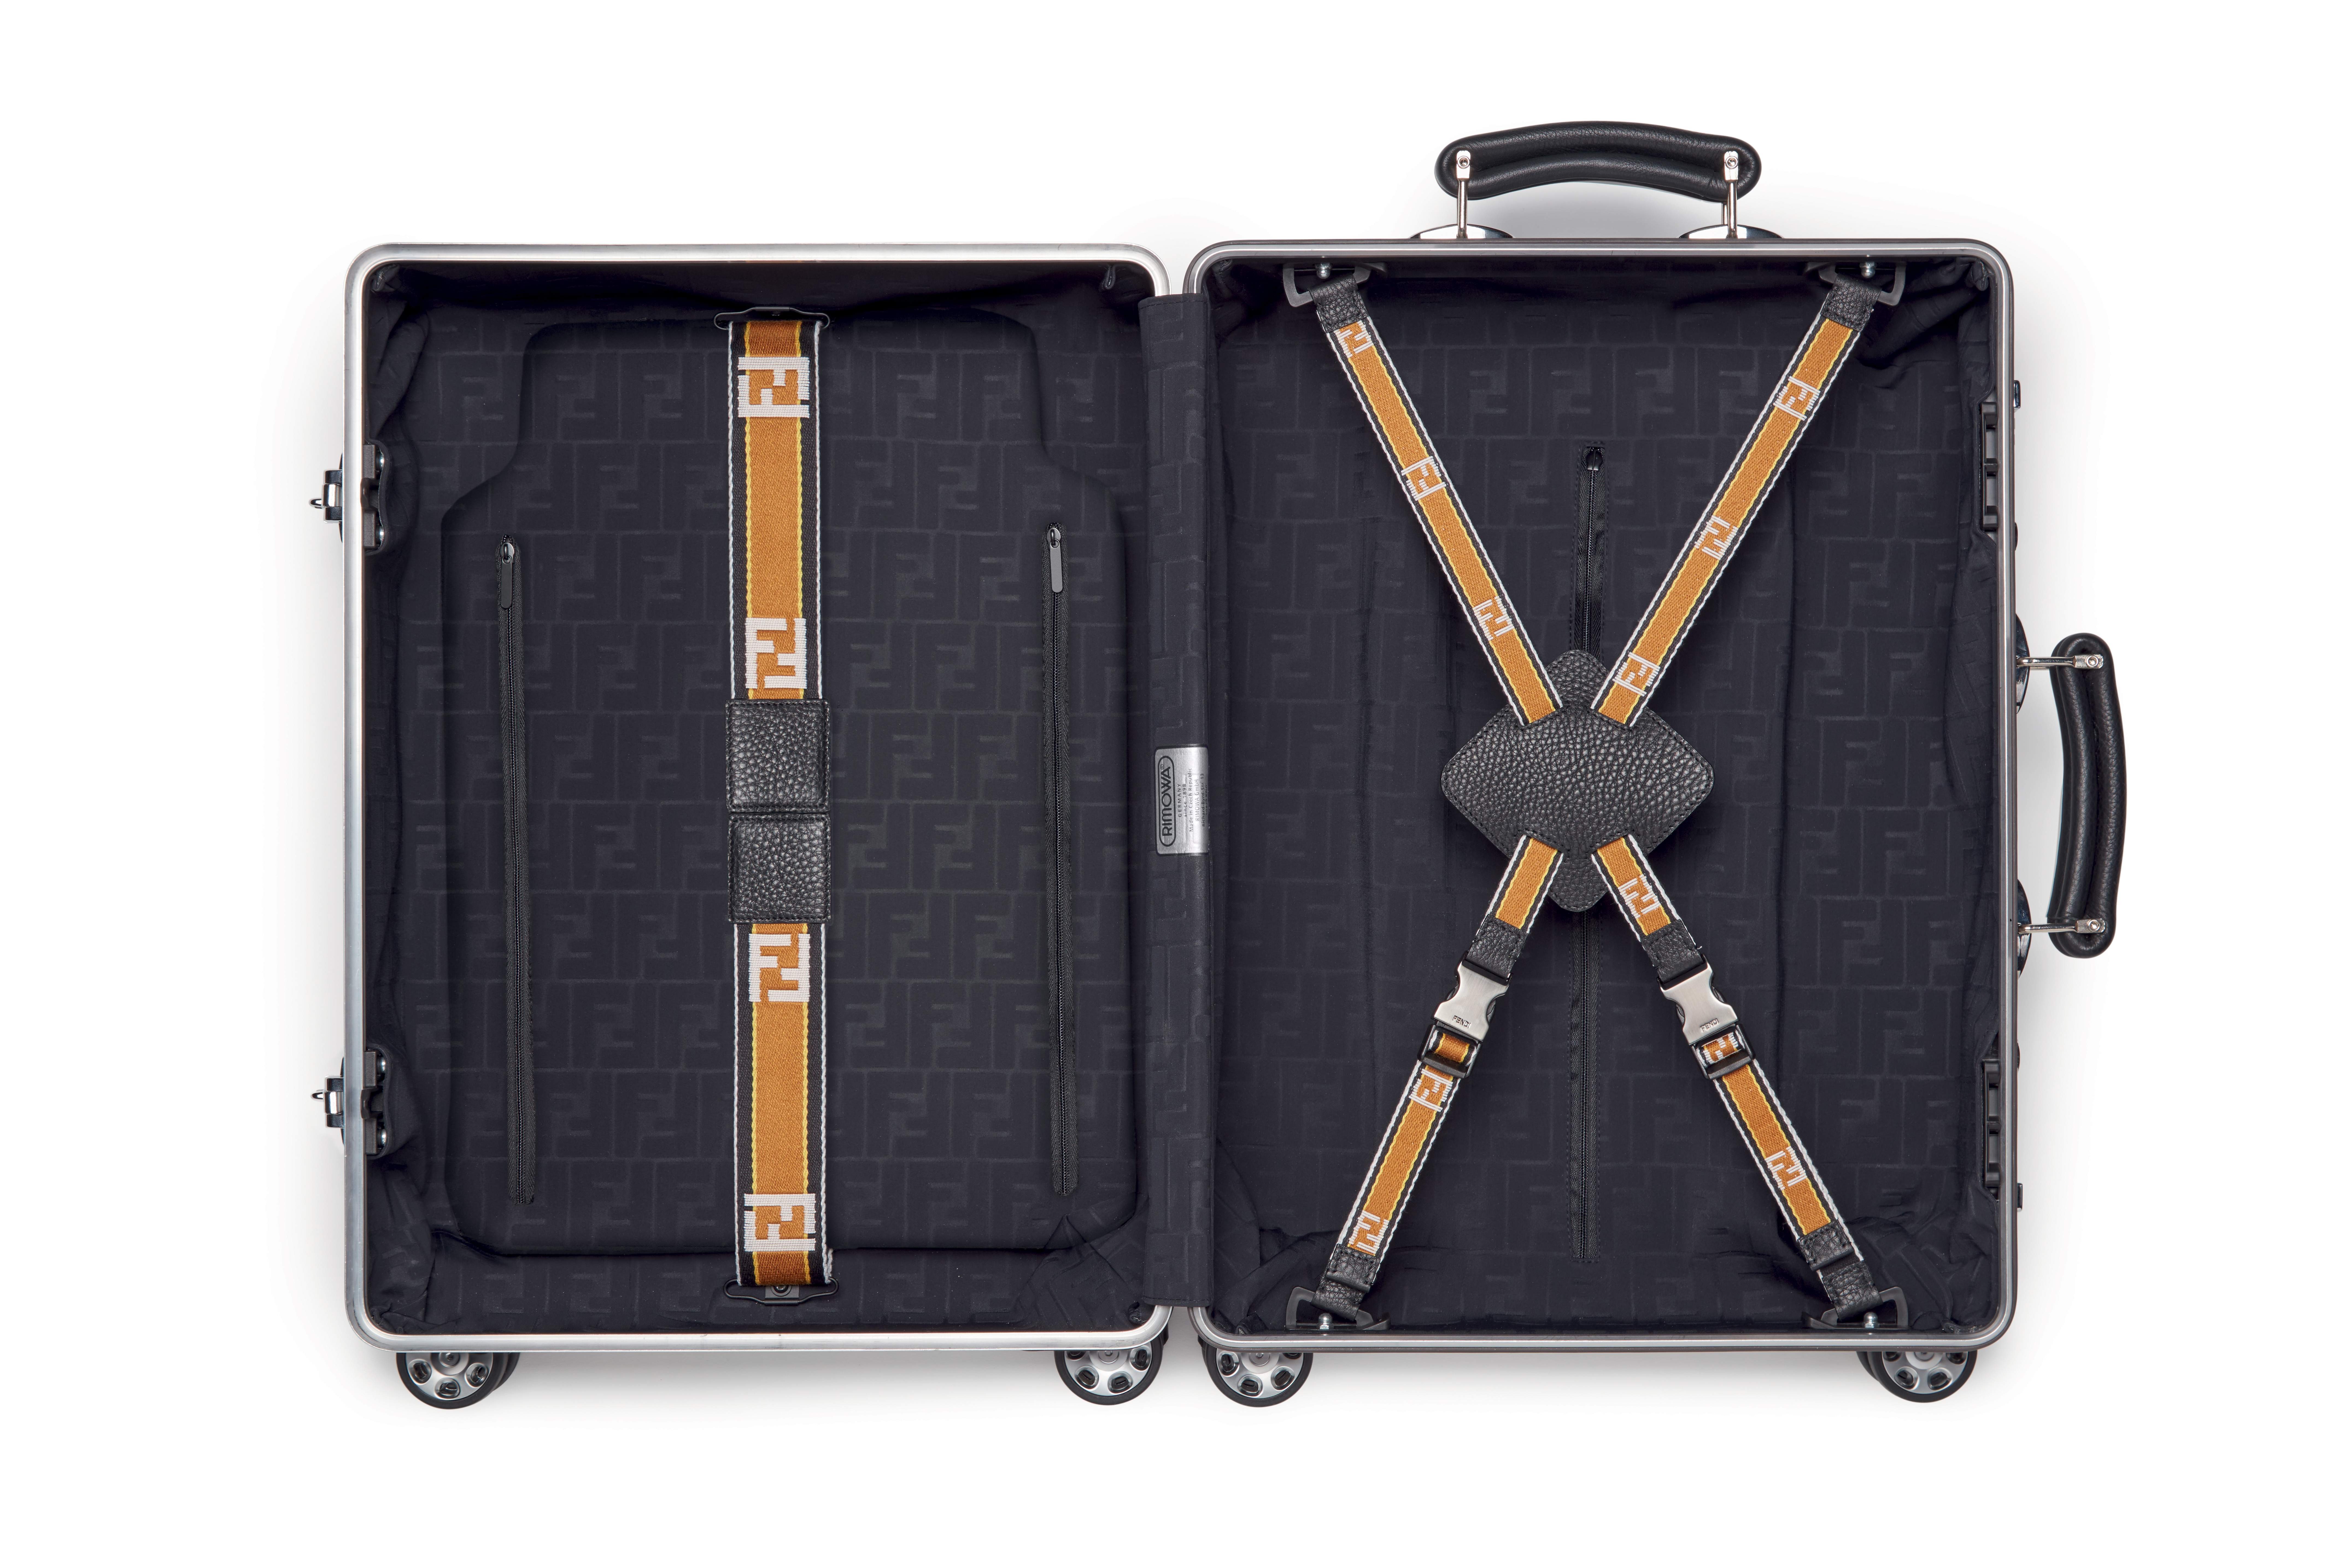 If you’re not planning on taking a trip any time soon, these luxury cases will soon change your mind and have you pining for a travel adventure